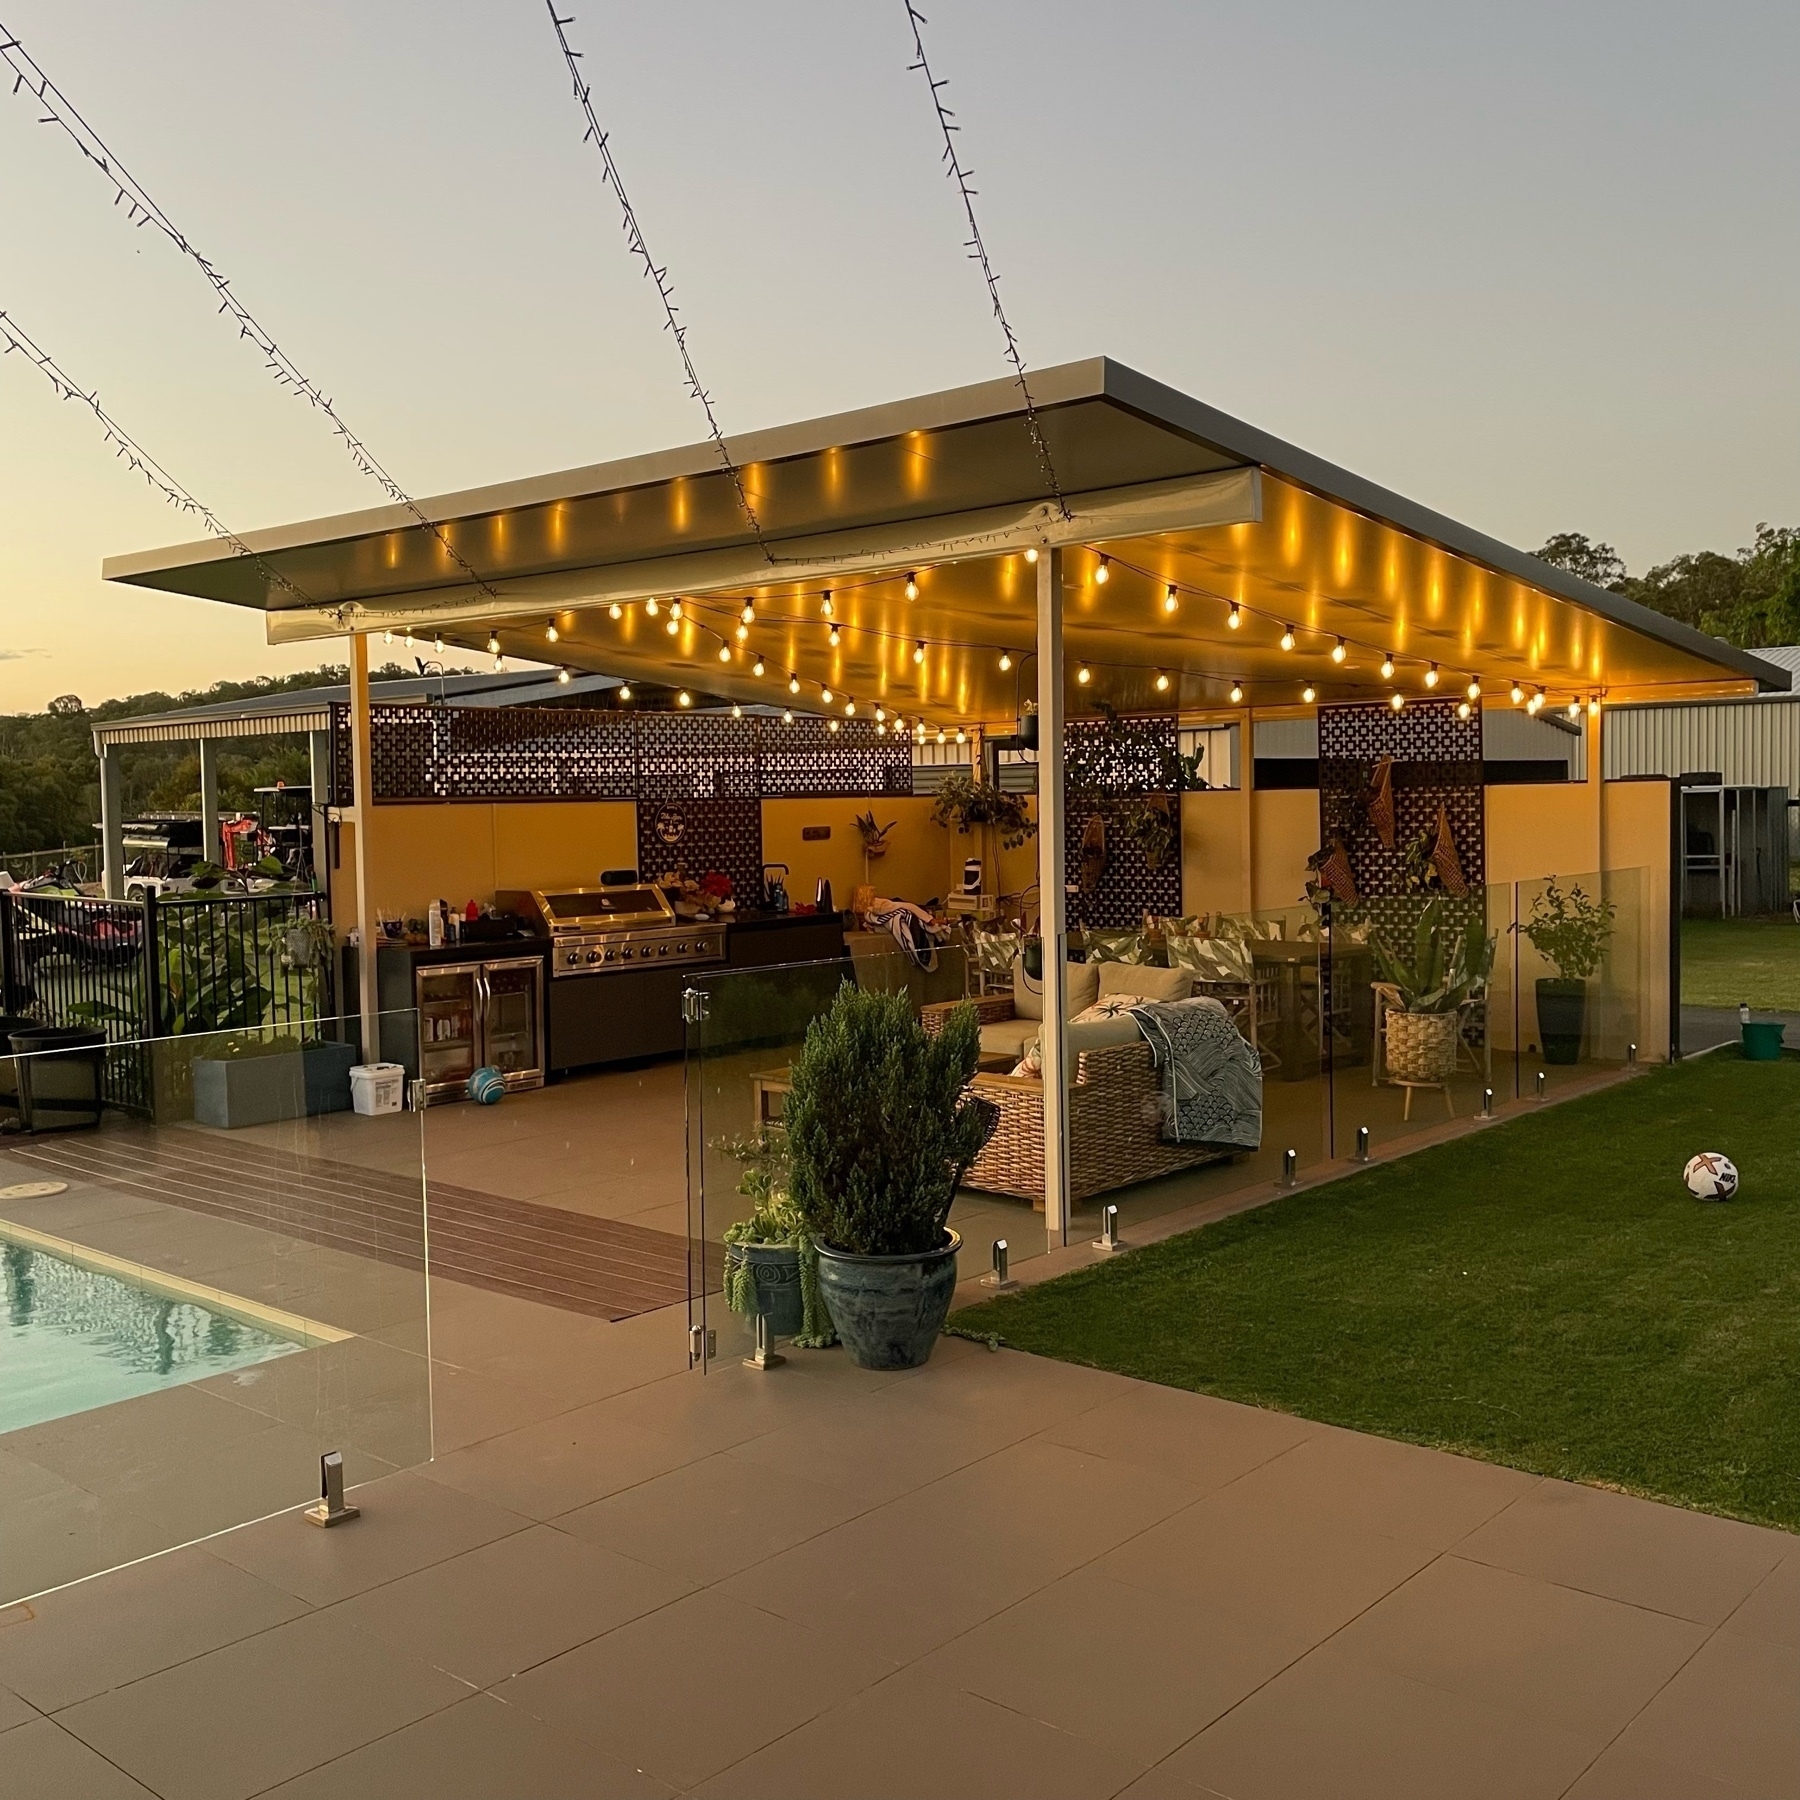 An outdoor dining and relaxation area; lit with festoon lighting.